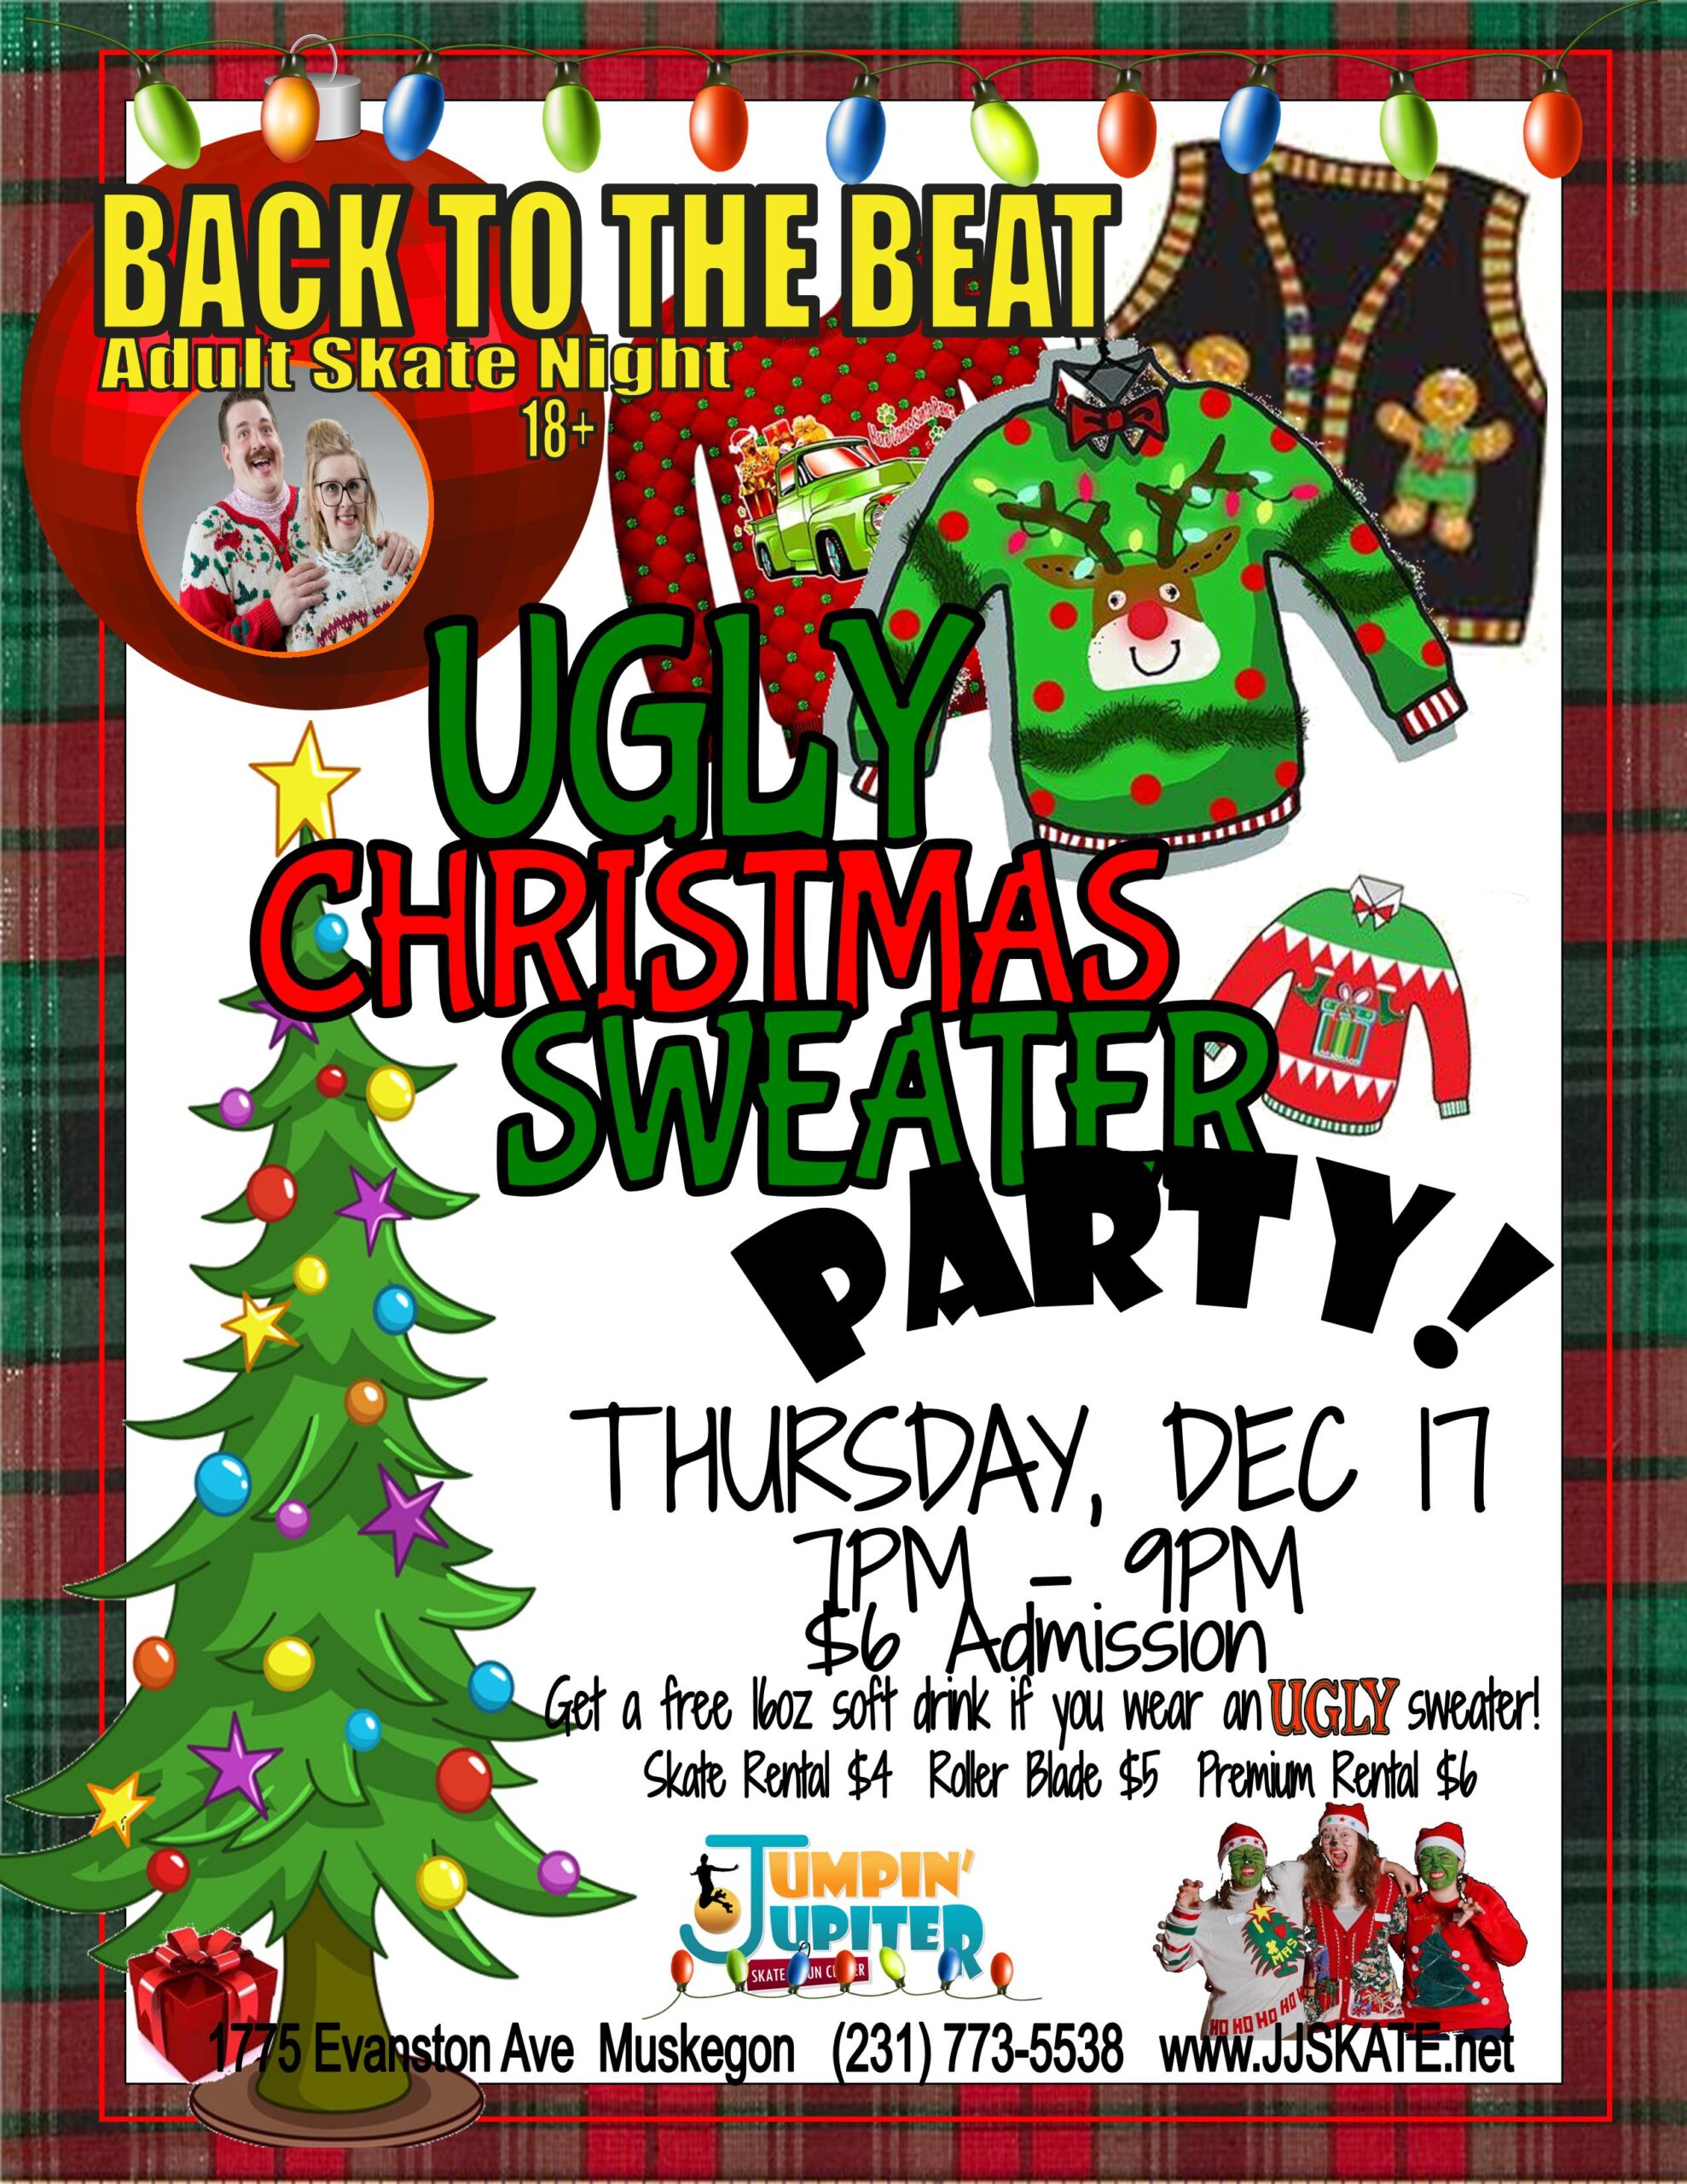 Adult Skate Night Flyer – Ugly Sweater Party Dec 2020 2 | Jumpin